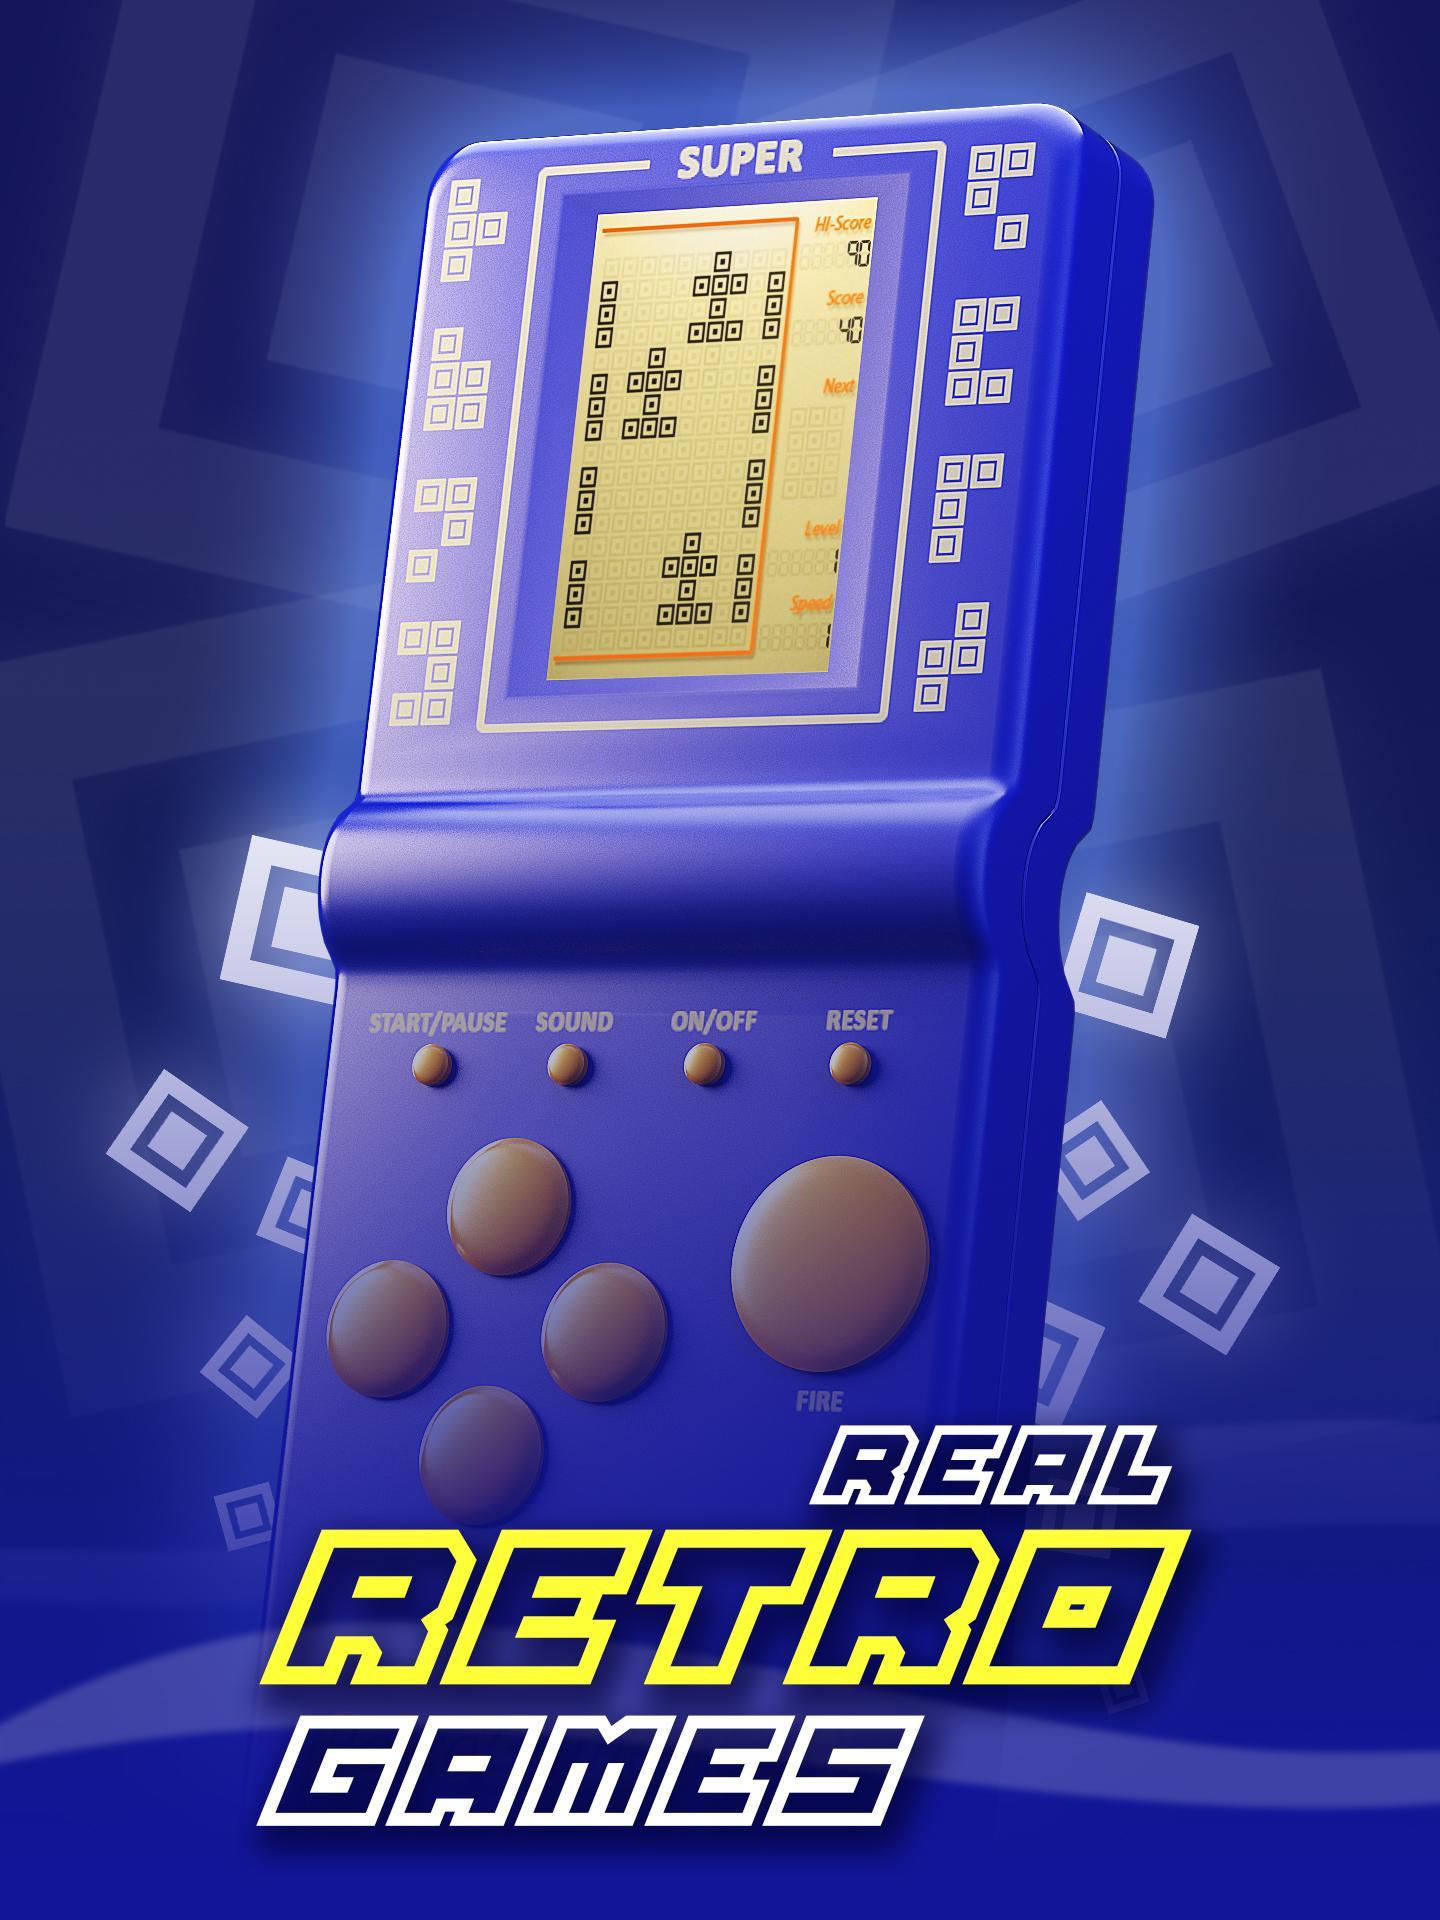 Real Retro Games - Brick Breaker for Android - APK Download